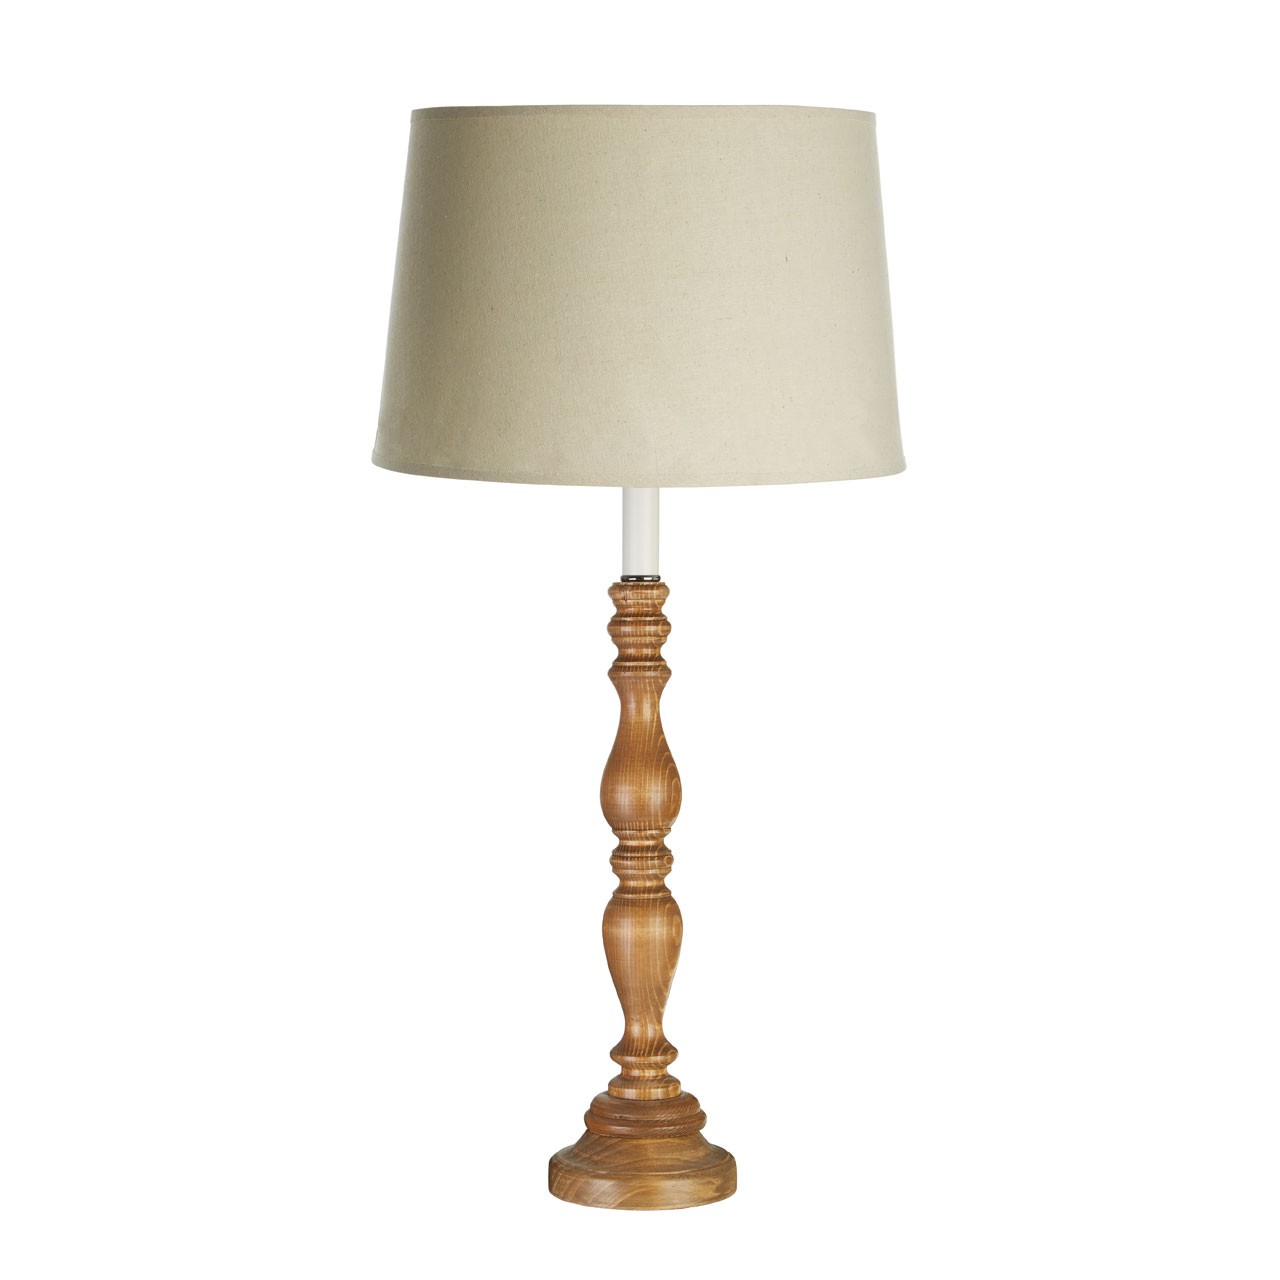 Prime Furnishing Candle Table Lamp with Wooden Base - Natural